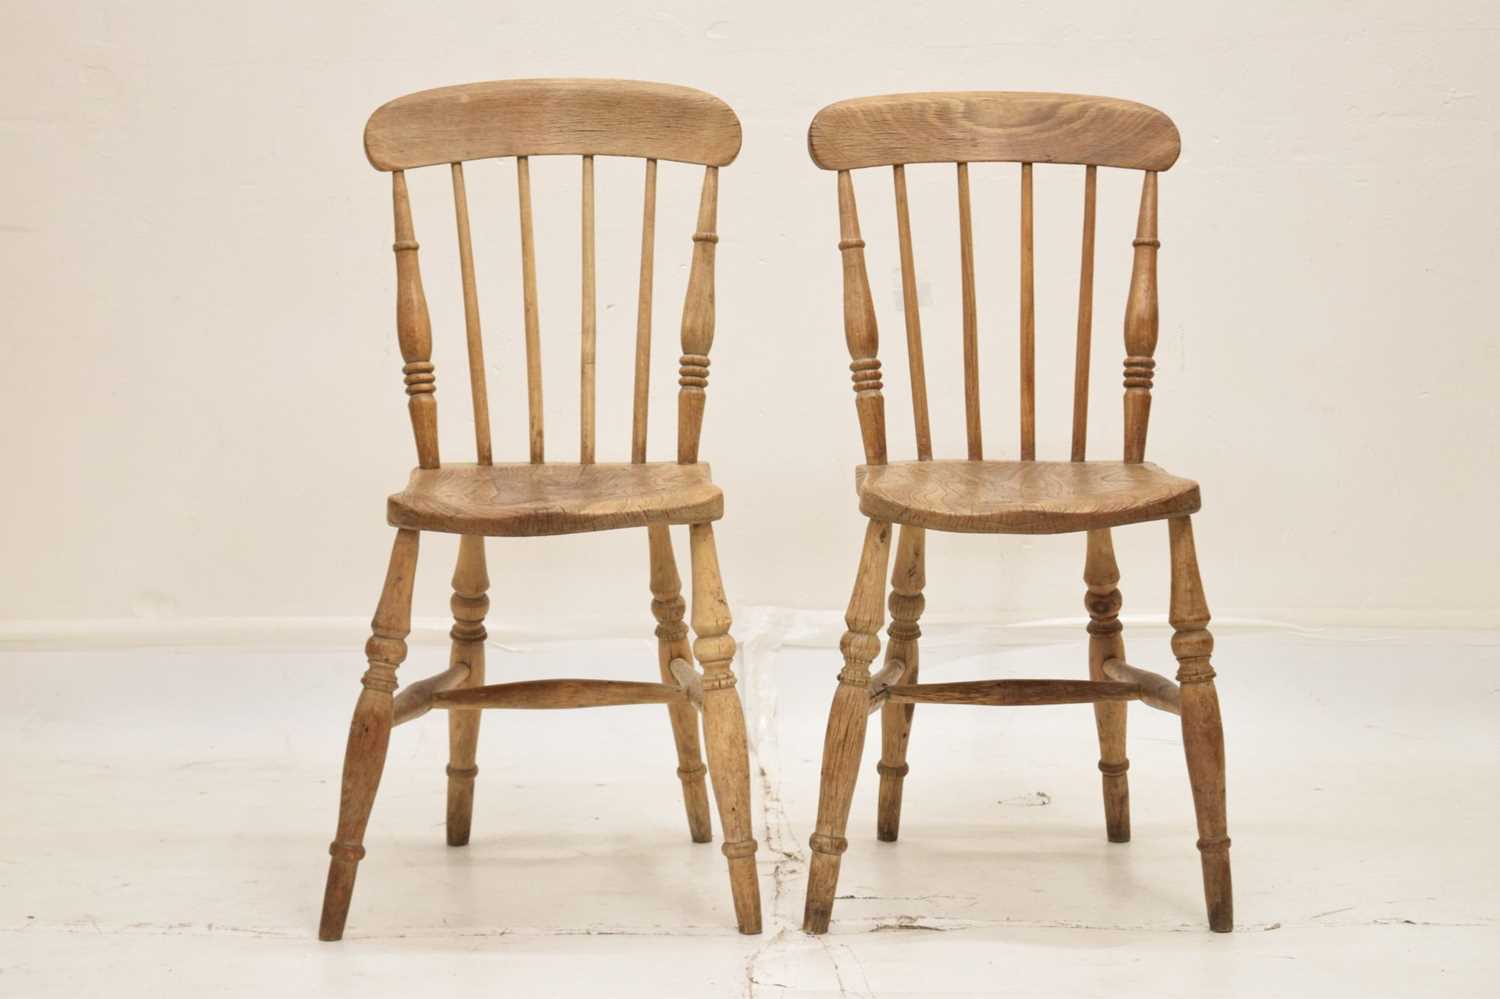 Pair of 19th century country stick back kitchen chairs - Image 2 of 8